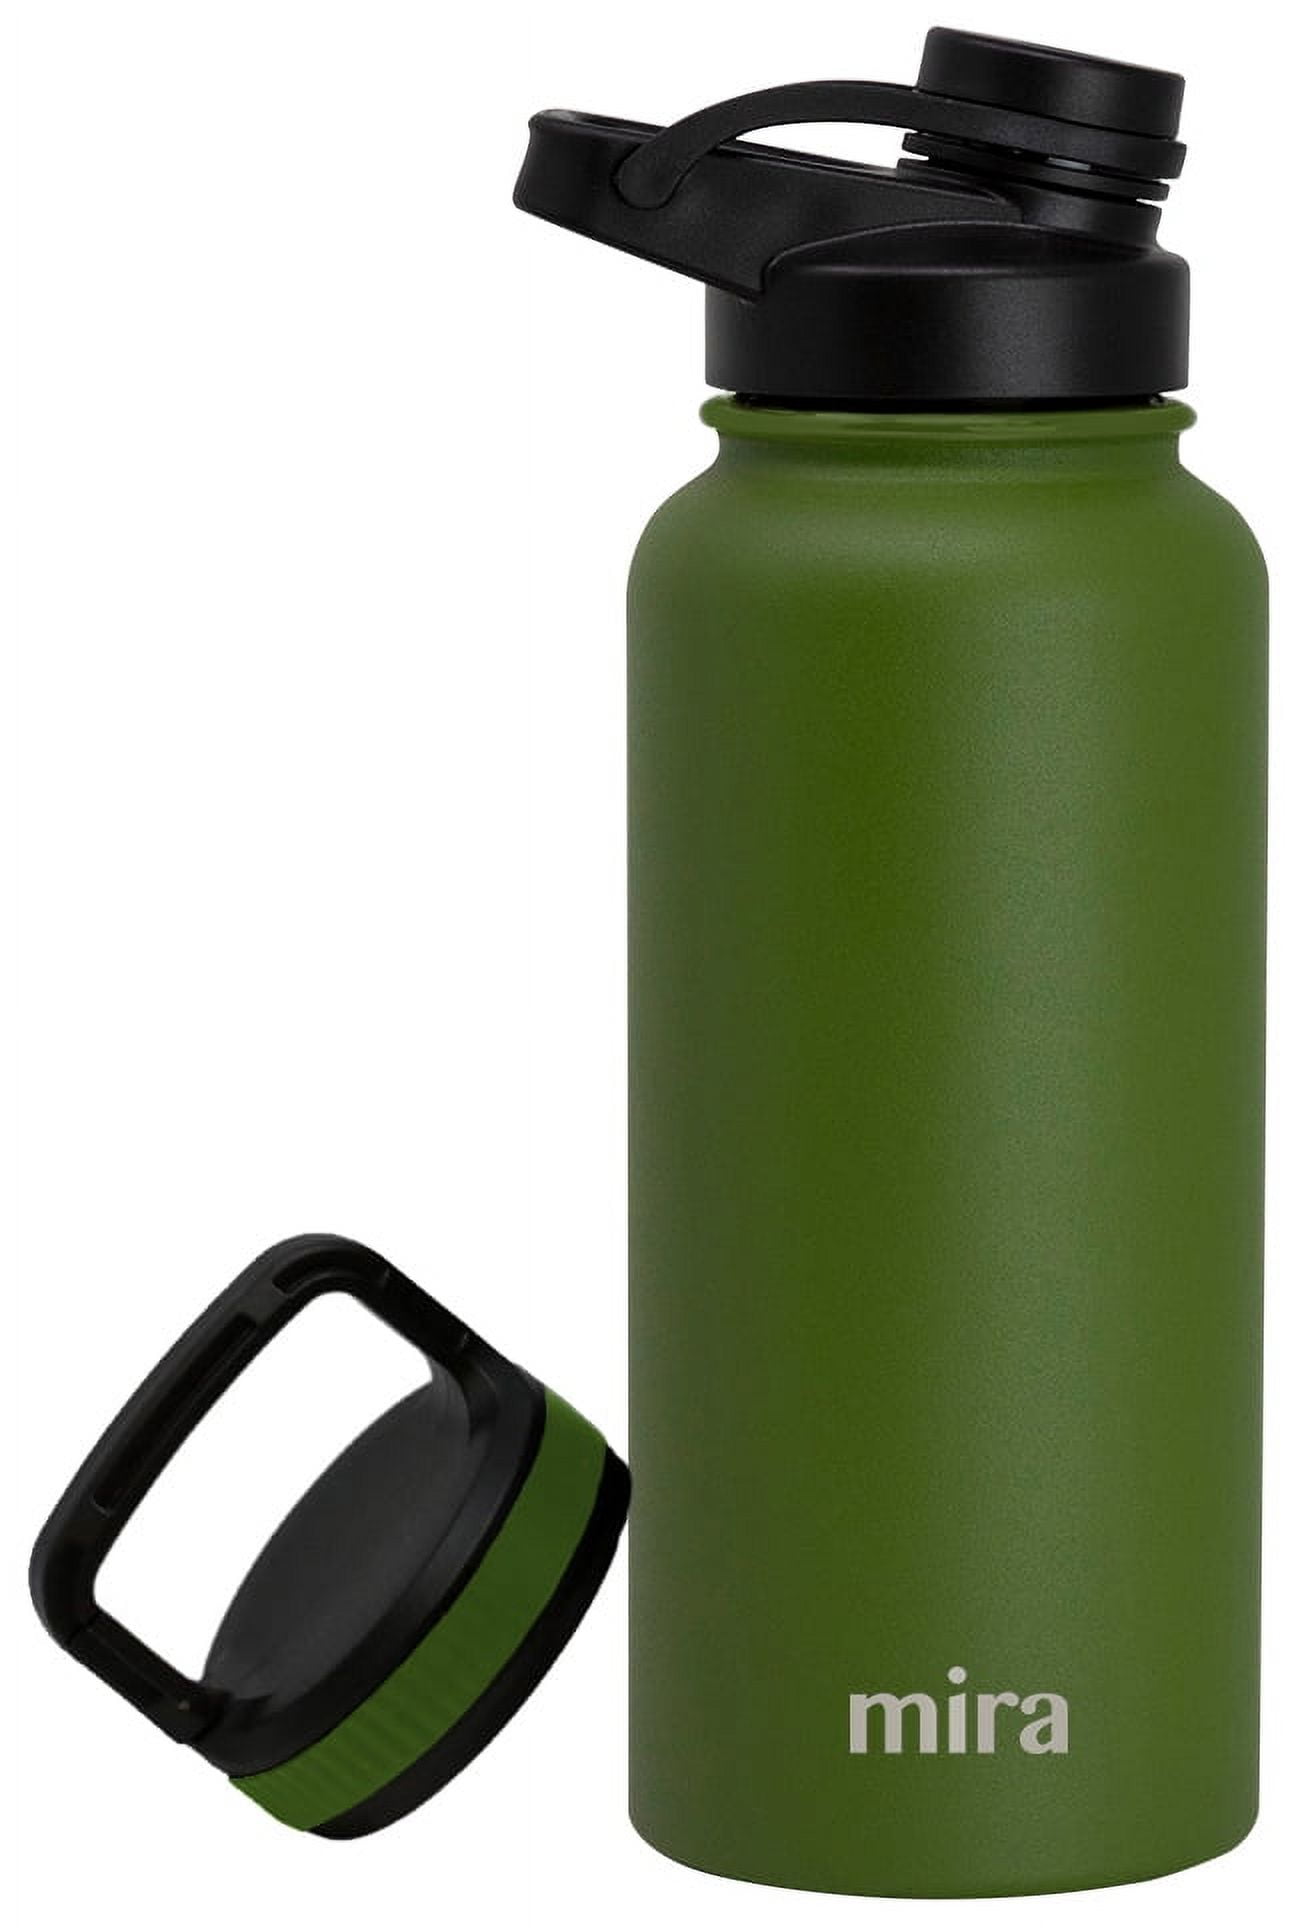 MIRA 32 oz Stainless Steel Insulated Sports Water Bottle - 2 Caps - Hydro  Metal Thermos Flask Keeps Cold for 24 Hours, Hot for 12 Hours - BPA-Free  Spout Lid Cap - Olive Green 